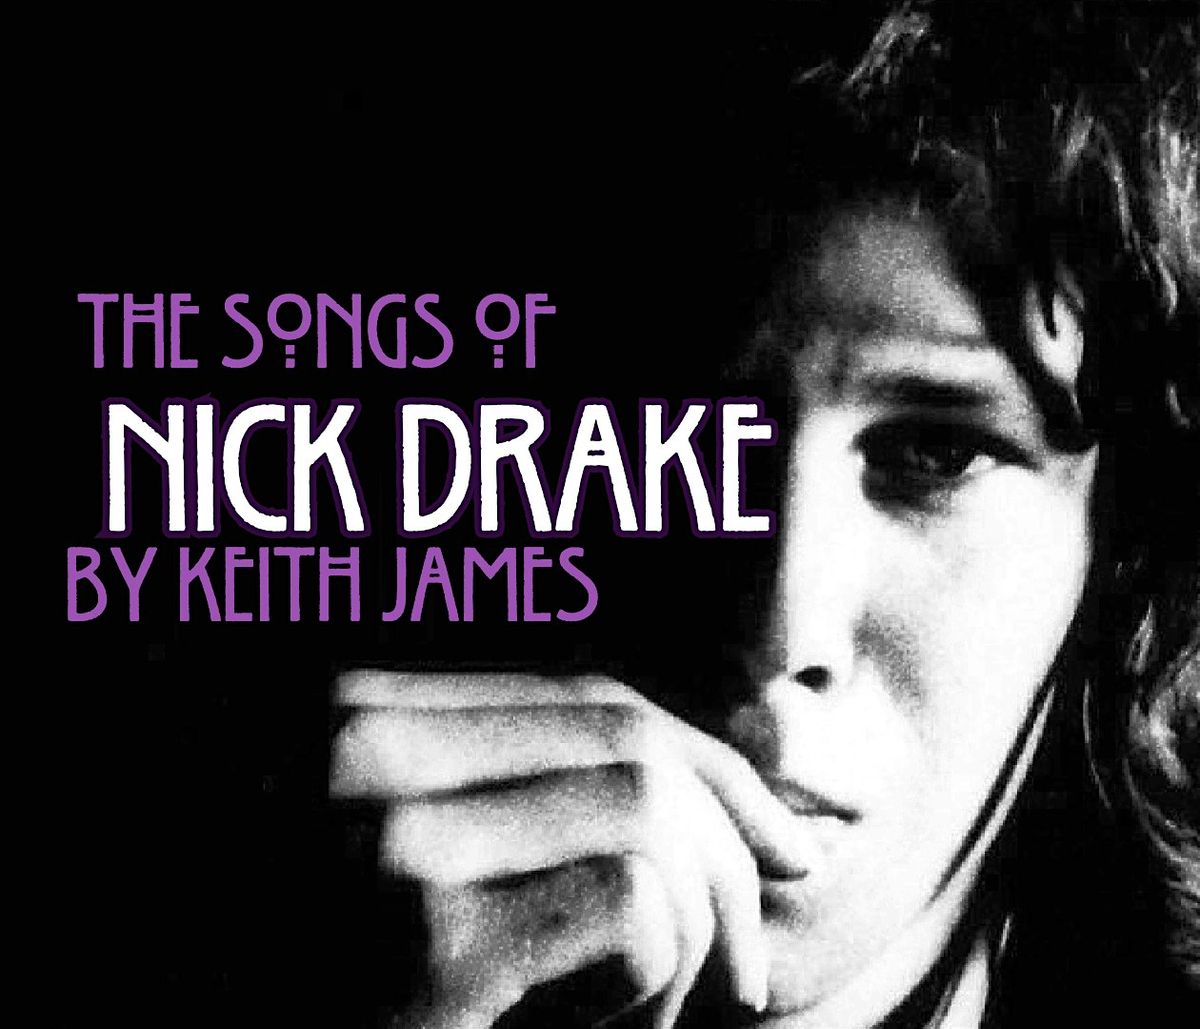 The Songs of Nick Drake by Keith James (Doors 7pm \/ Performance 7:30)